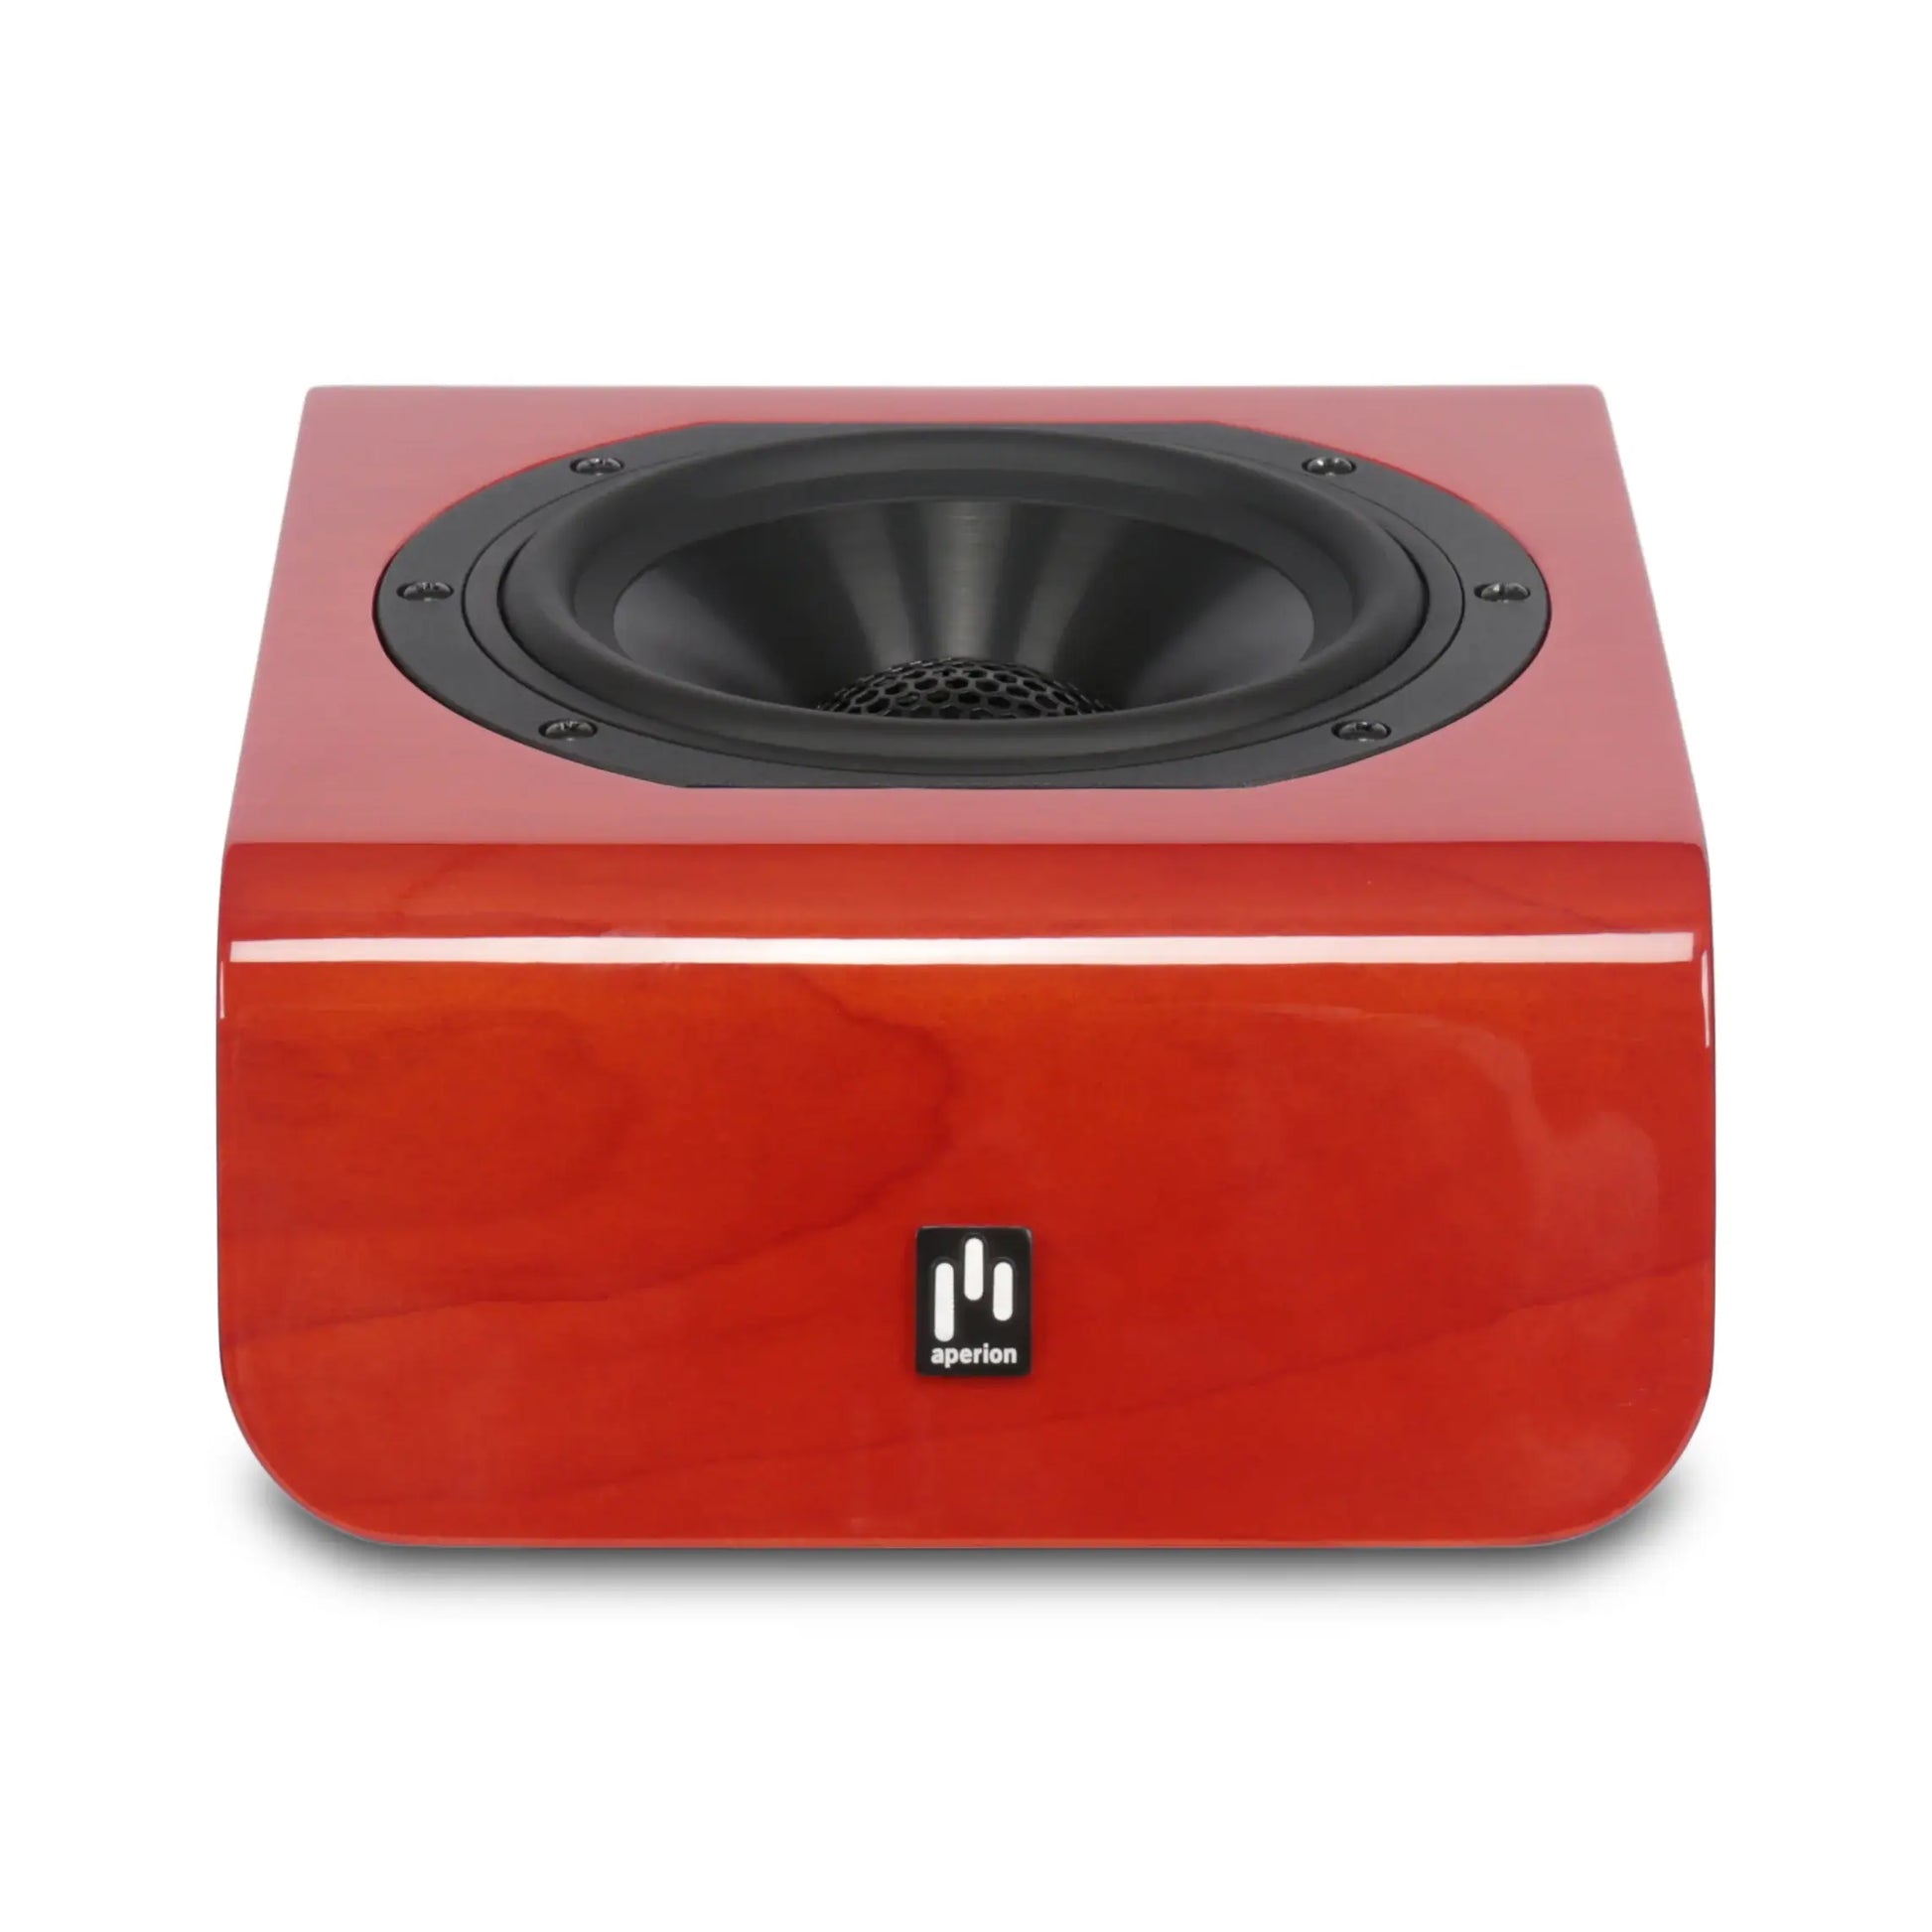 Aperion-A5-Atmos-5.25"-Immersive-Reflective/Height-Module-Speaker-Gloss-Cherry-Frontside-Withno-Grille-aperionaudio